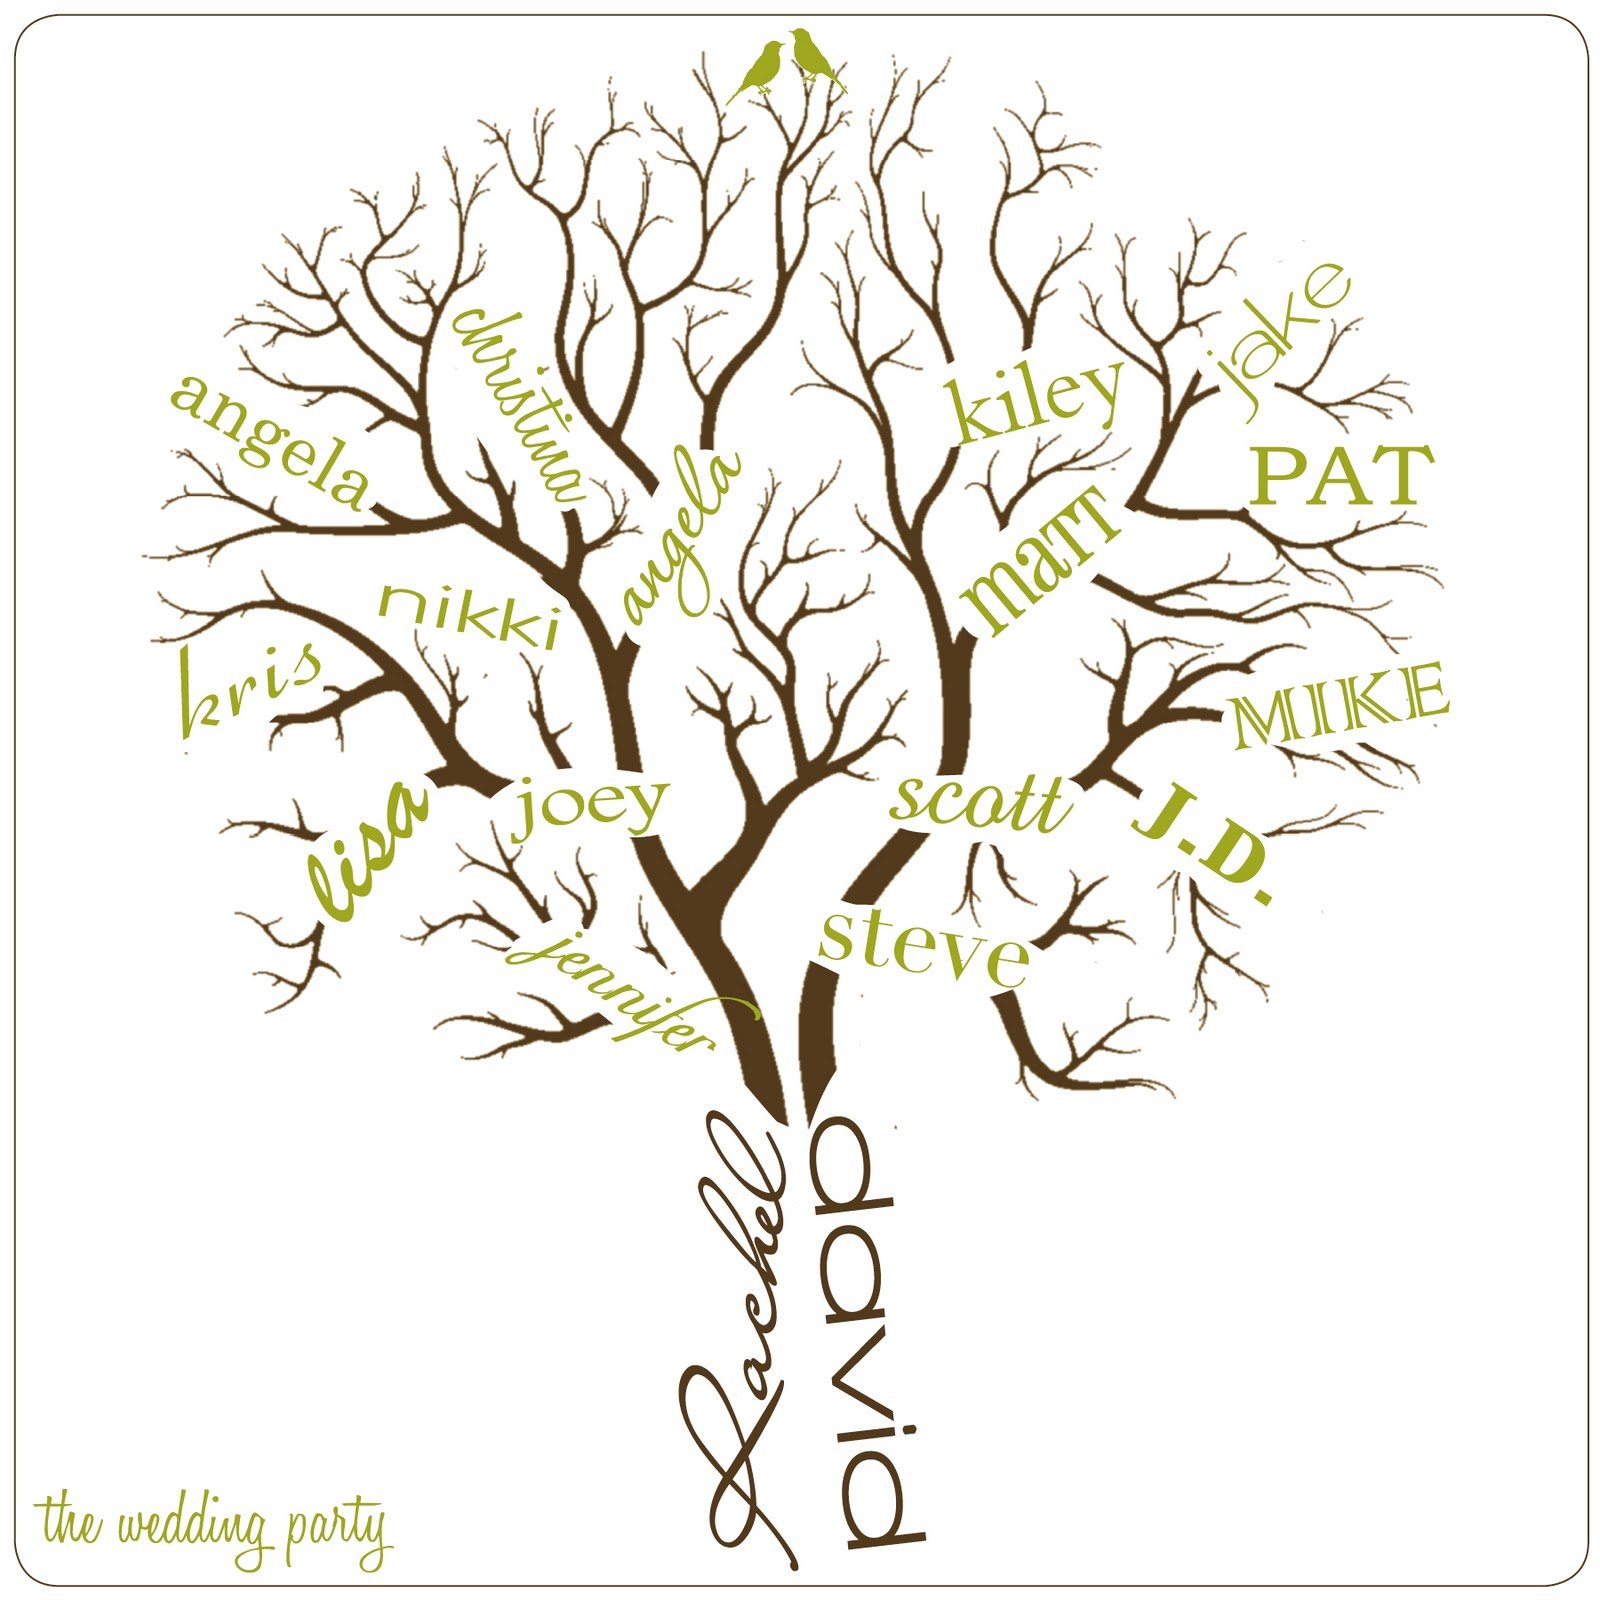 3 Generation Ancestor Family Tree - Name Submission Instructions - Branches